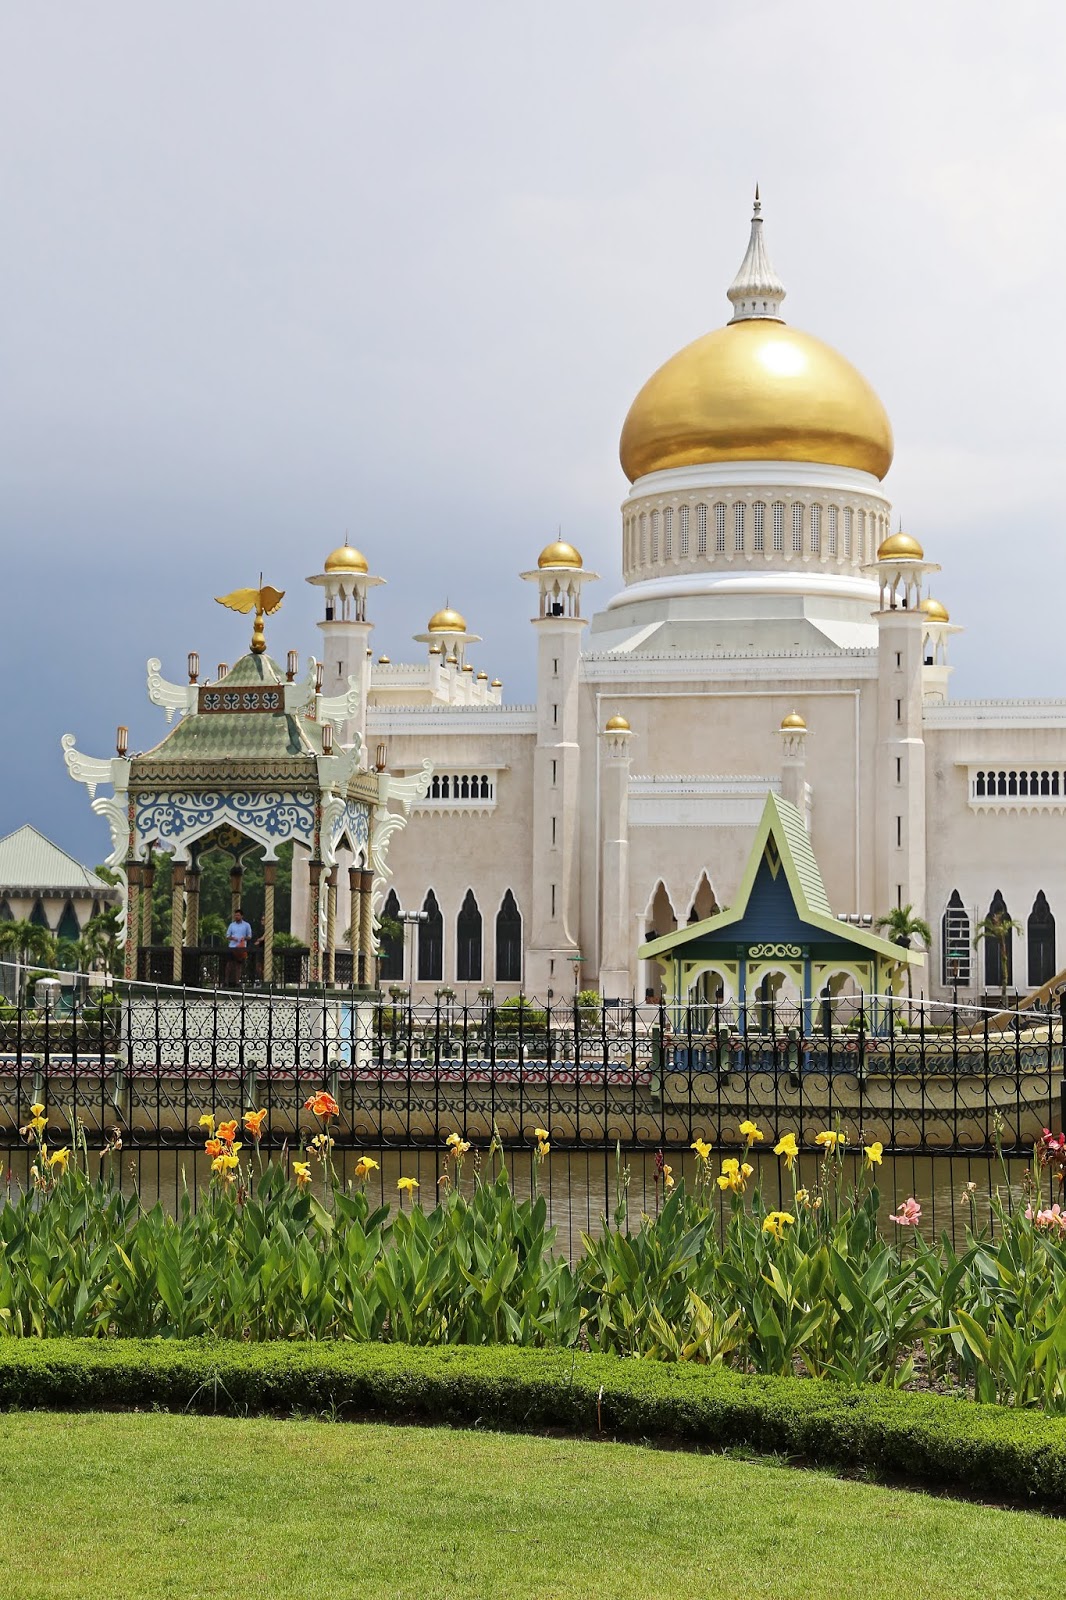 Bandar Seri Begawan, Brunei Darussalam: A Day Trip in the Capital of "The Most Boring Country In Southeast Asia"